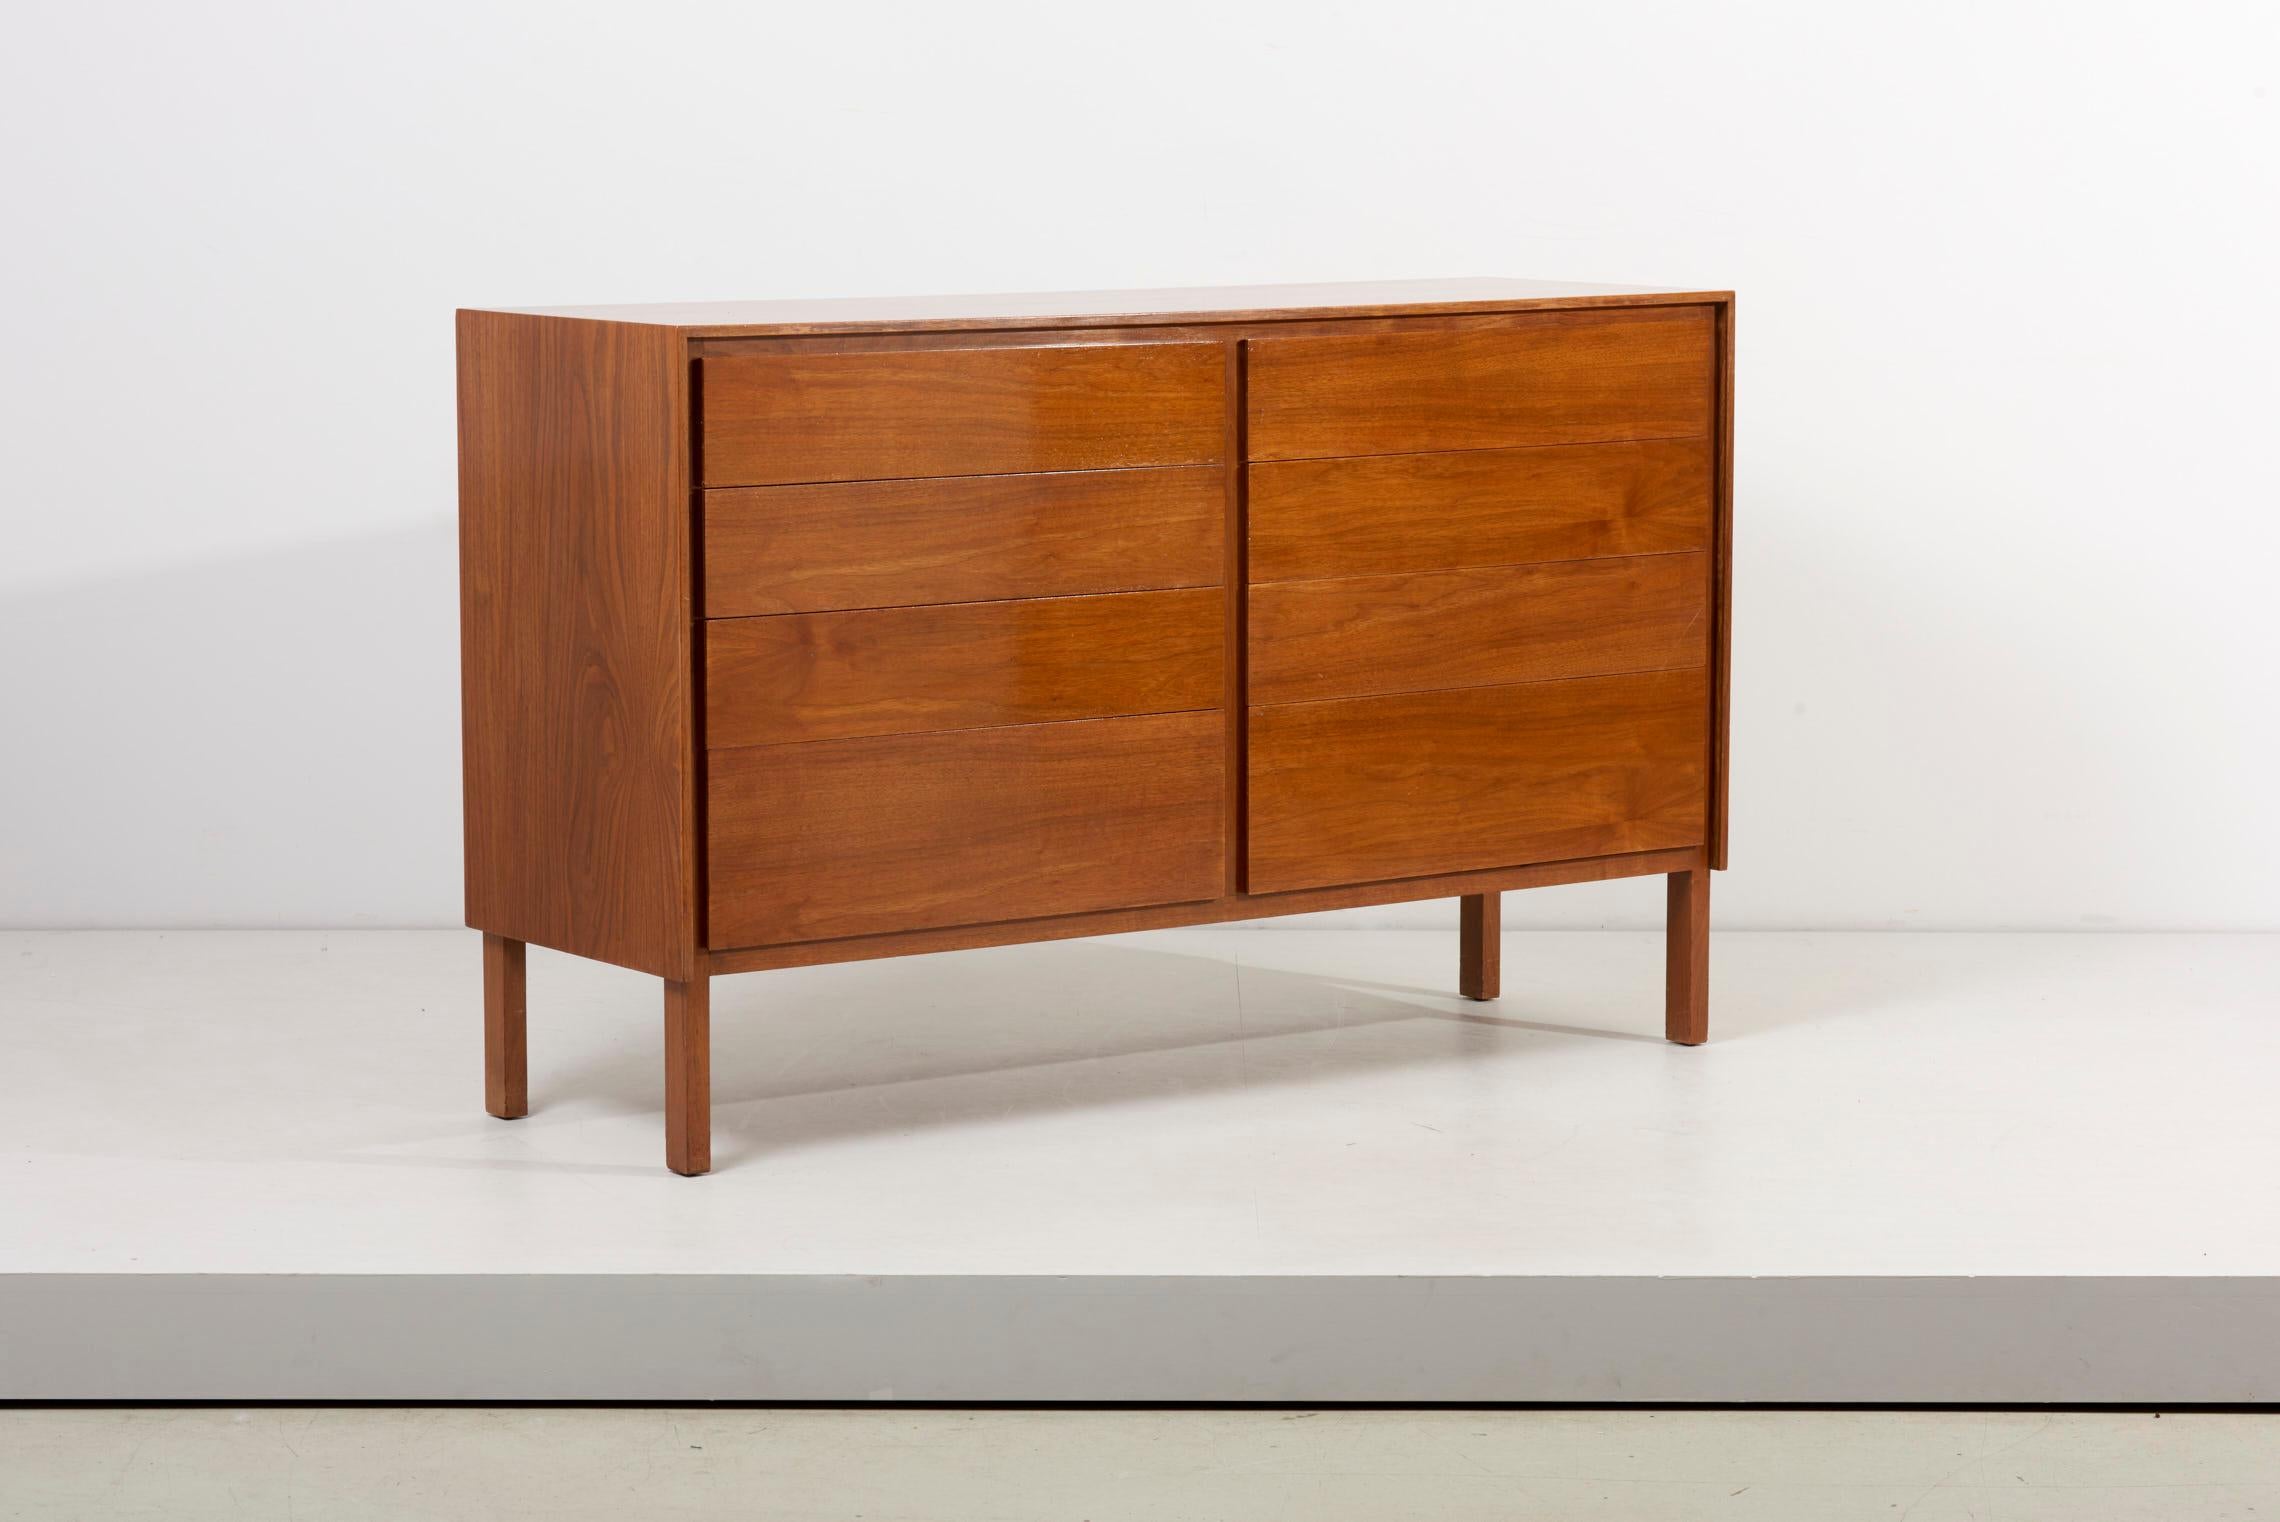 A very modern non handle sideboard in Walnut by Allan Gould, USA 1960s 
The drawers can be opened with a little gap on the sides of the drawers.
All opens very smooth and easy going.